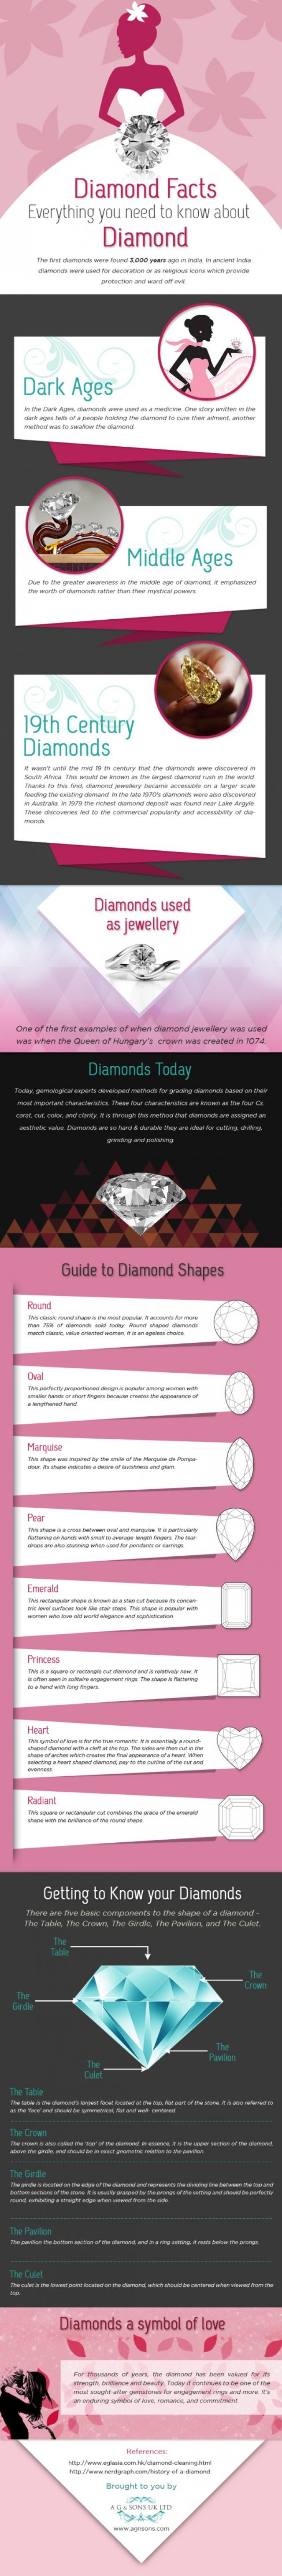 wedding photo - Everthing You Need To Know About Diamonds